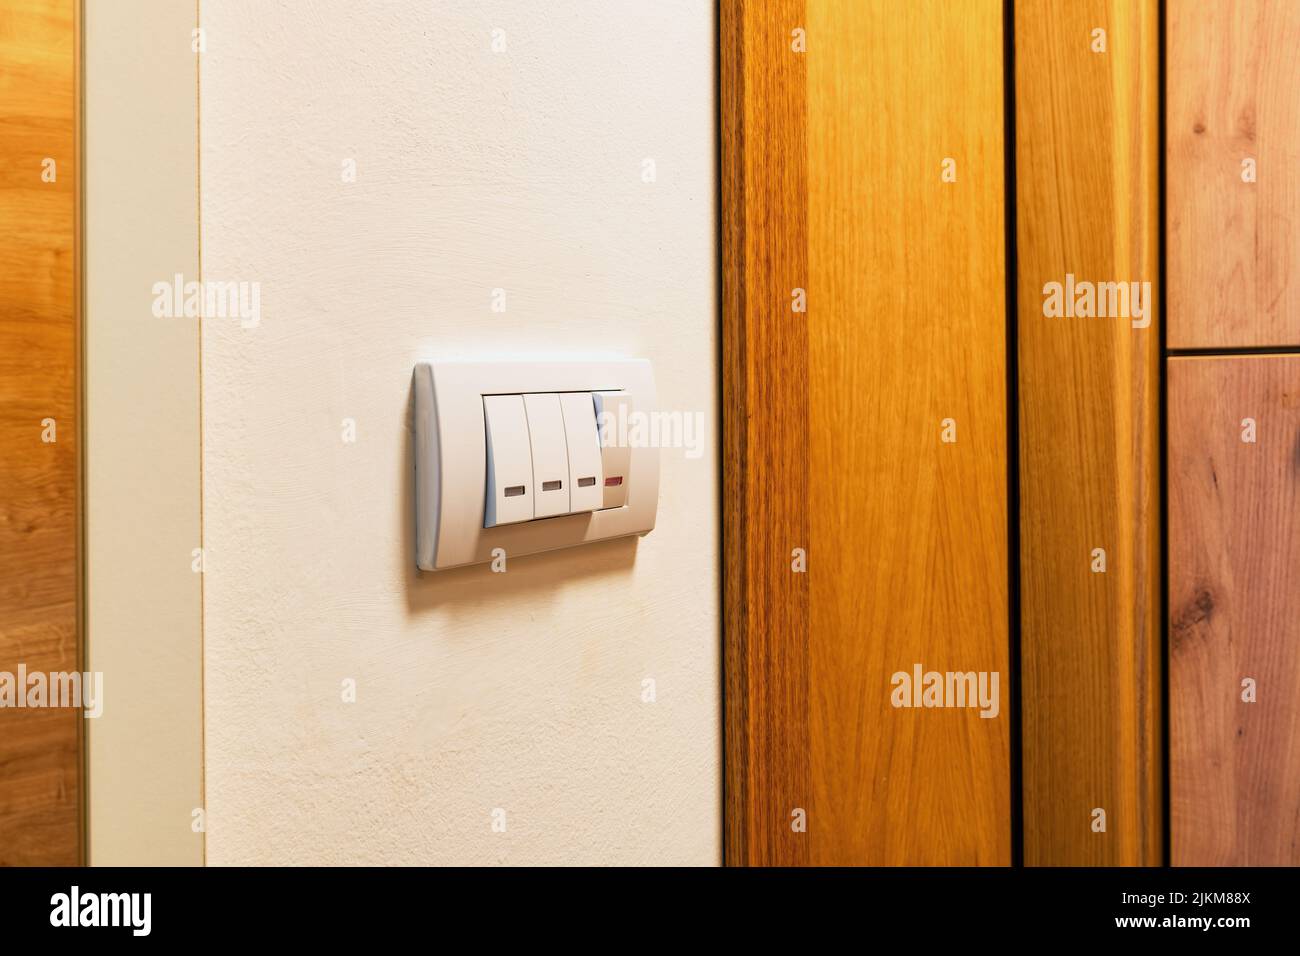 Bathroom switches with light indicators at home apartment wall, selective focus Stock Photo